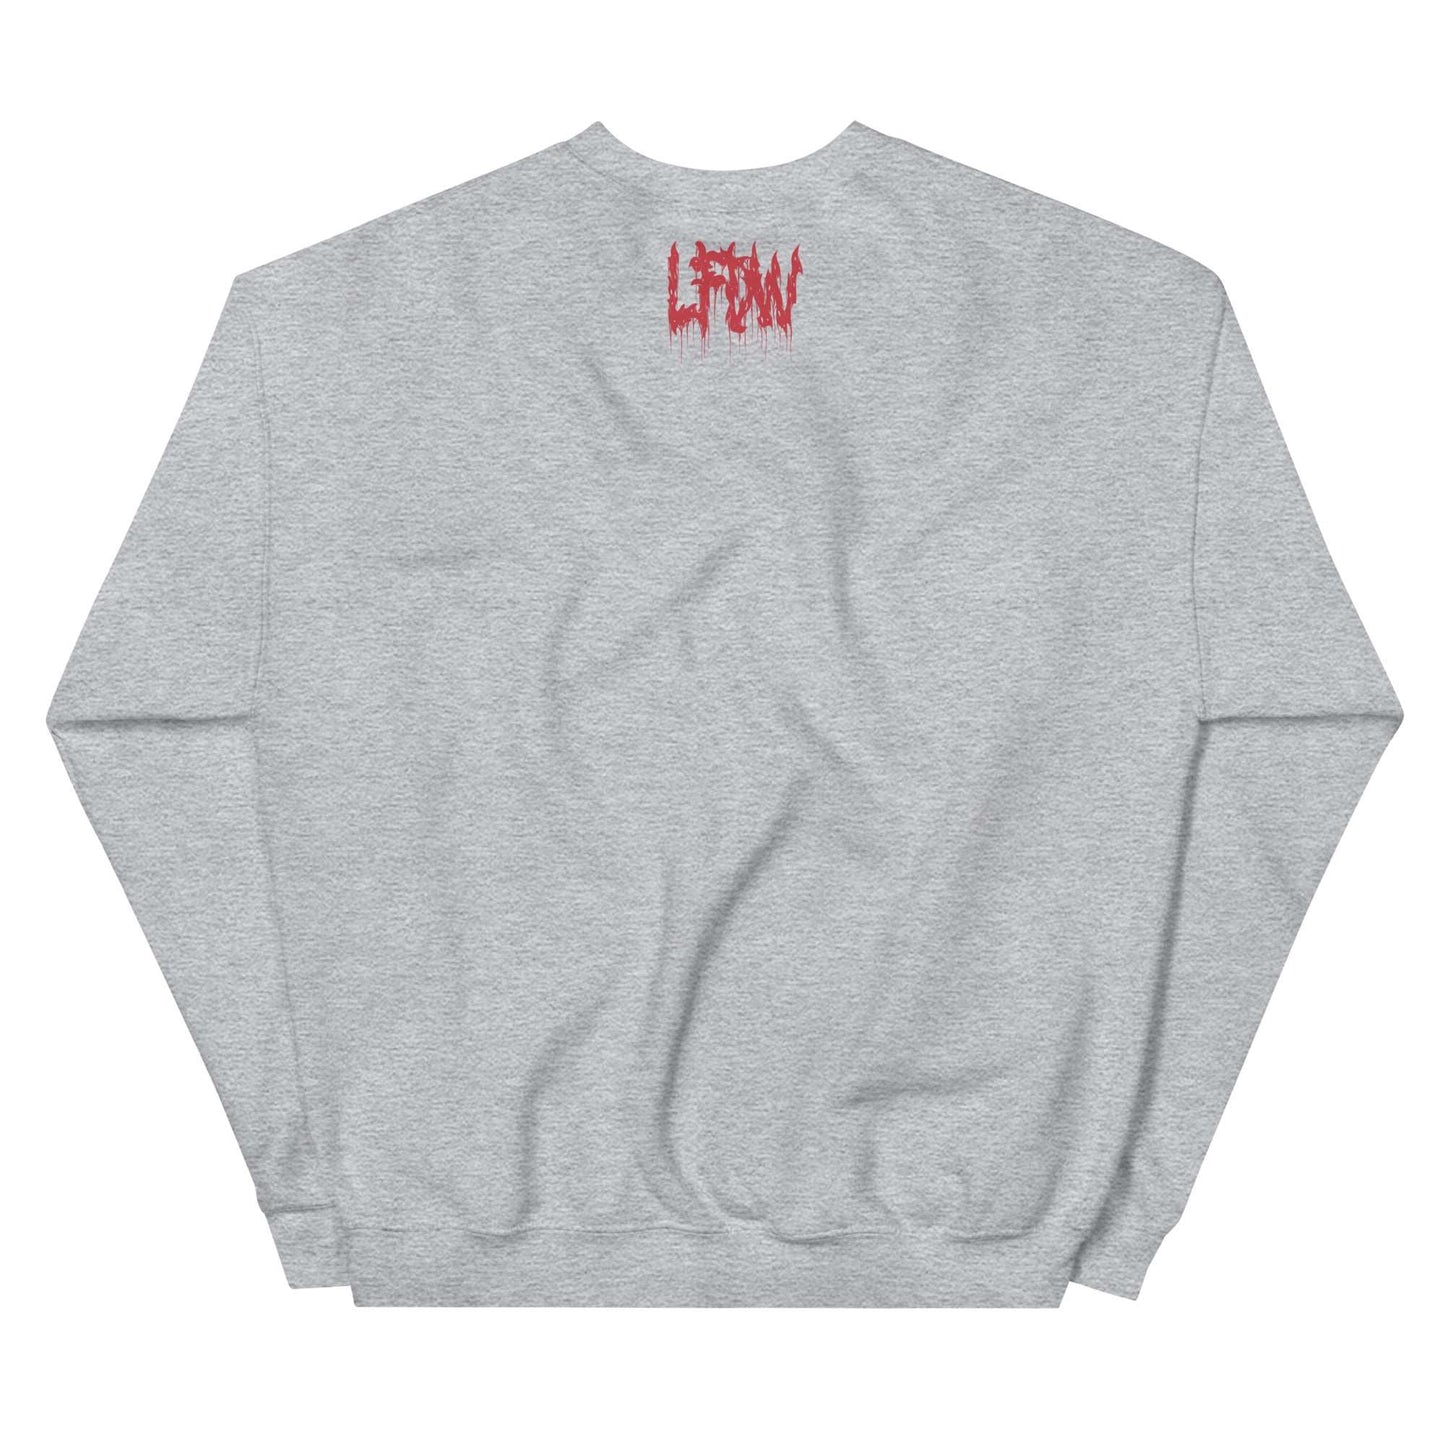 I'm So Lonesome I Could Die Crew Neck